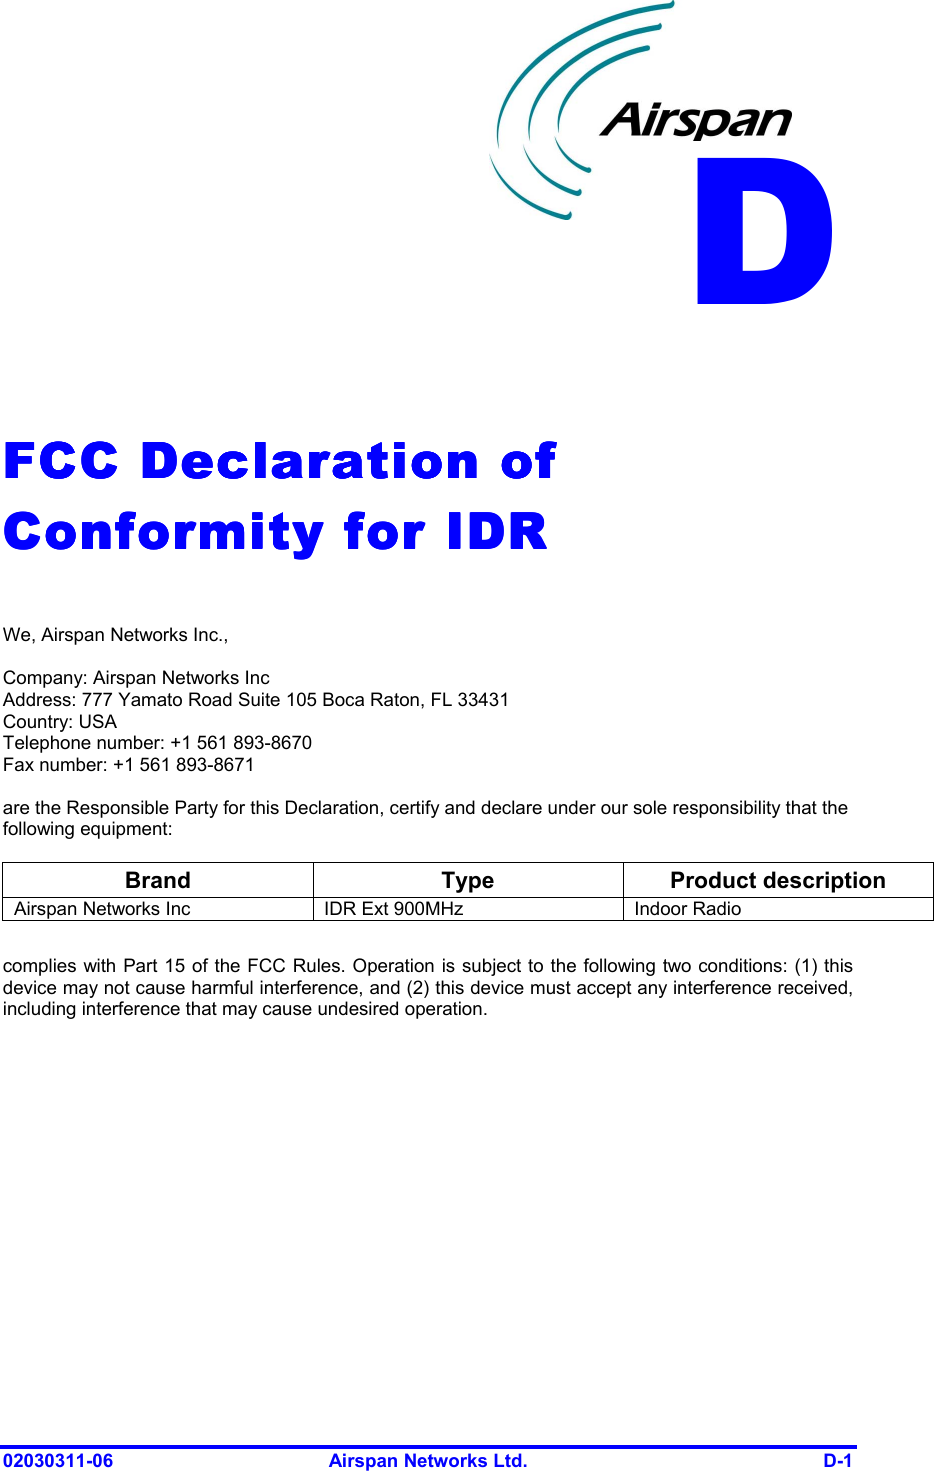  02030311-06  Airspan Networks Ltd.  D-1   FCC Declaration of FCC Declaration of FCC Declaration of FCC Declaration of Conformity for IDRConformity for IDRConformity for IDRConformity for IDR     We, Airspan Networks Inc.,  Company: Airspan Networks Inc Address: 777 Yamato Road Suite 105 Boca Raton, FL 33431 Country: USA Telephone number: +1 561 893-8670 Fax number: +1 561 893-8671  are the Responsible Party for this Declaration, certify and declare under our sole responsibility that the following equipment:  Brand Type Product description Airspan Networks Inc  IDR Ext 900MHz  Indoor Radio   complies with Part 15 of the FCC Rules. Operation is subject to the following two conditions: (1) this device may not cause harmful interference, and (2) this device must accept any interference received, including interference that may cause undesired operation. D